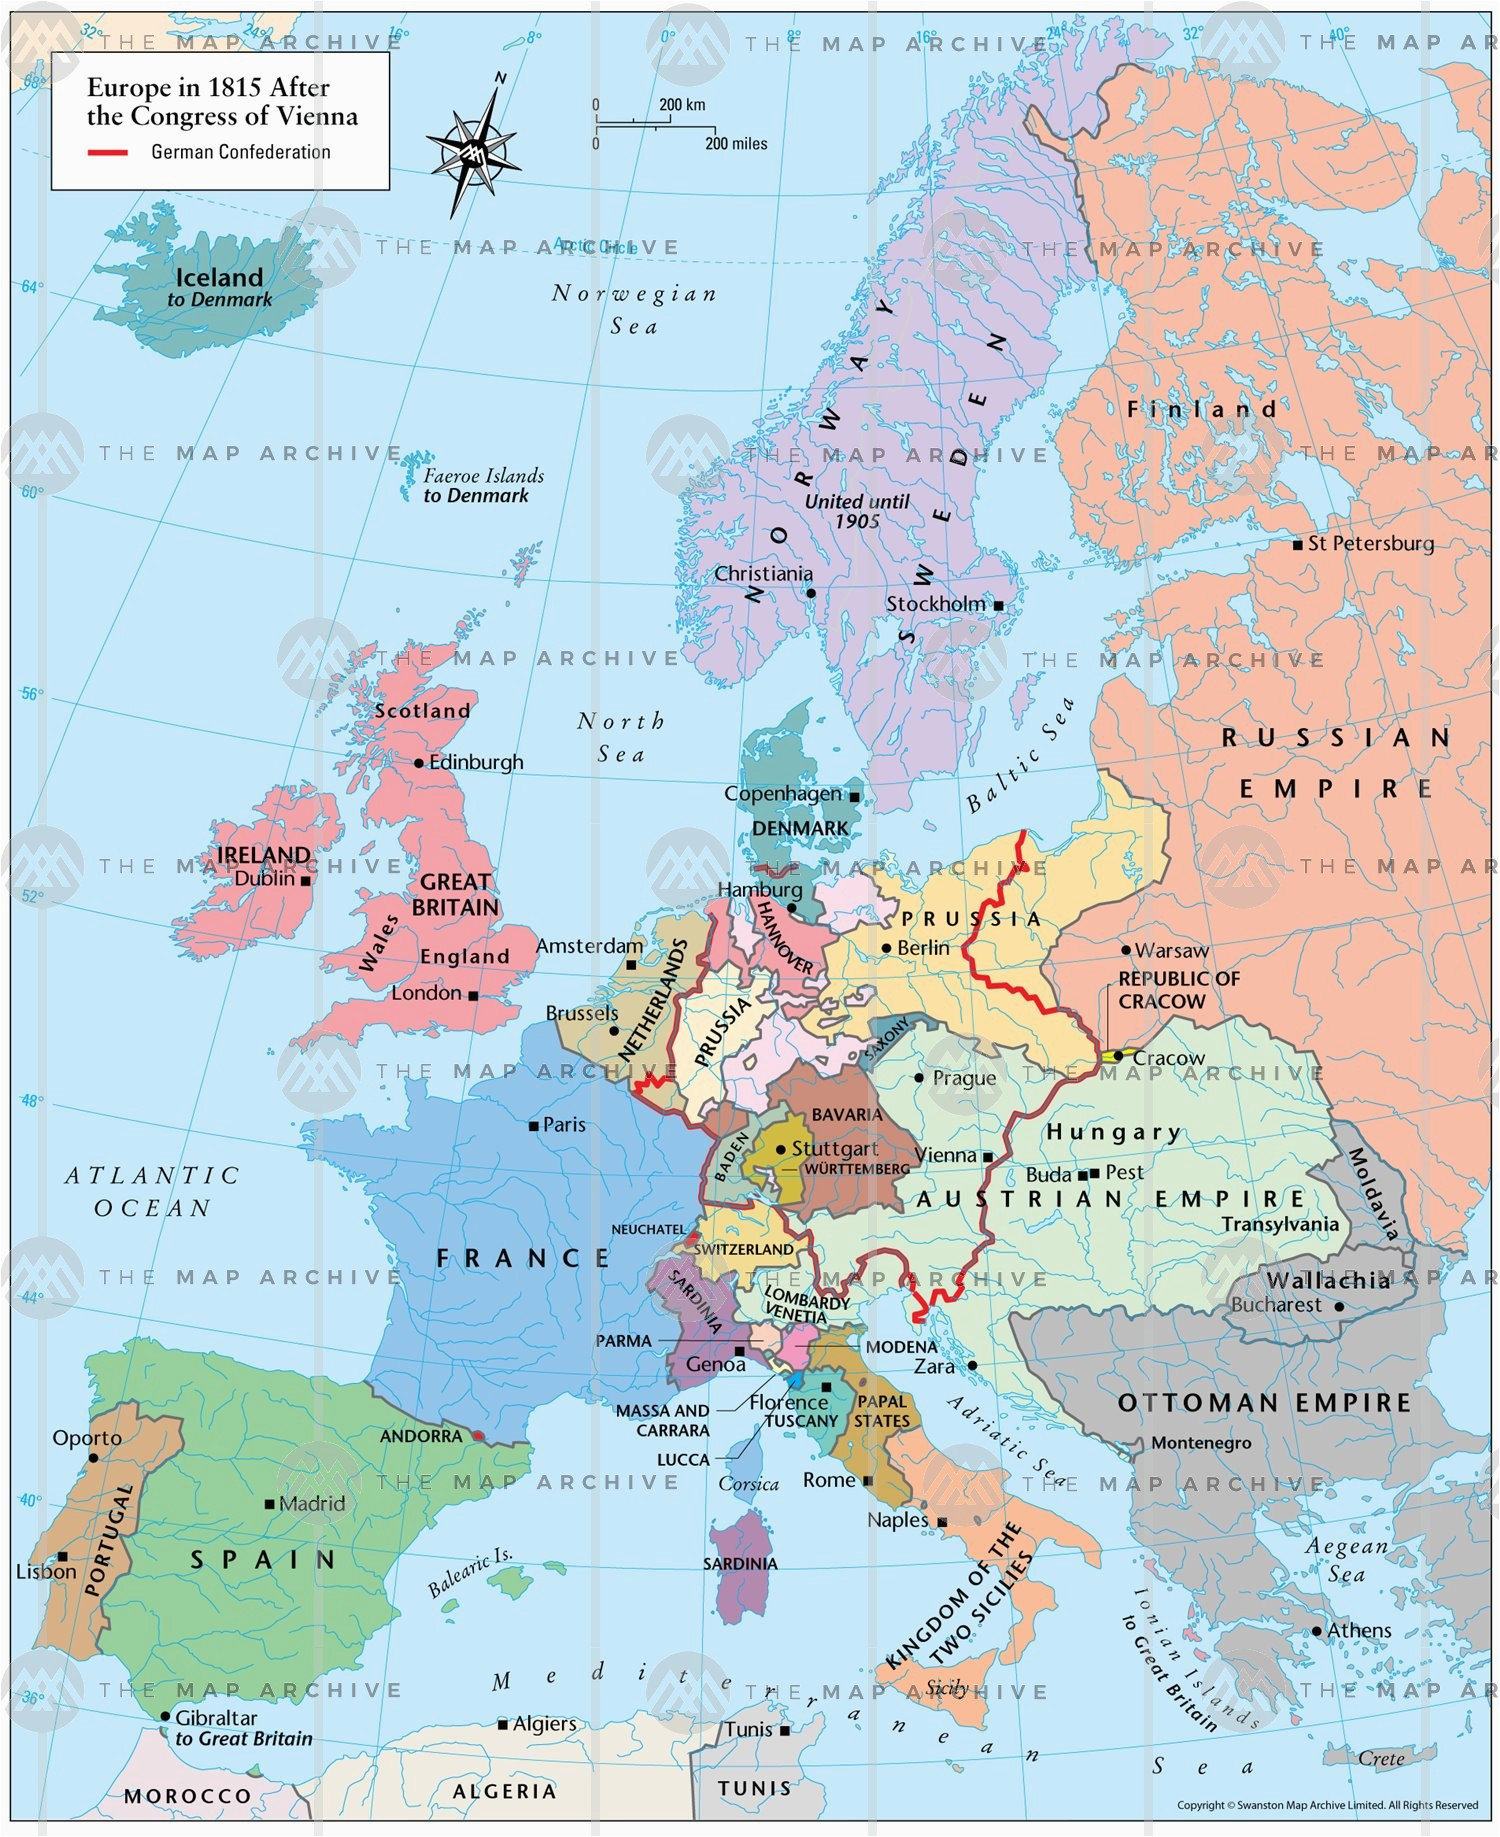 europe in 1815 after the congress of vienna